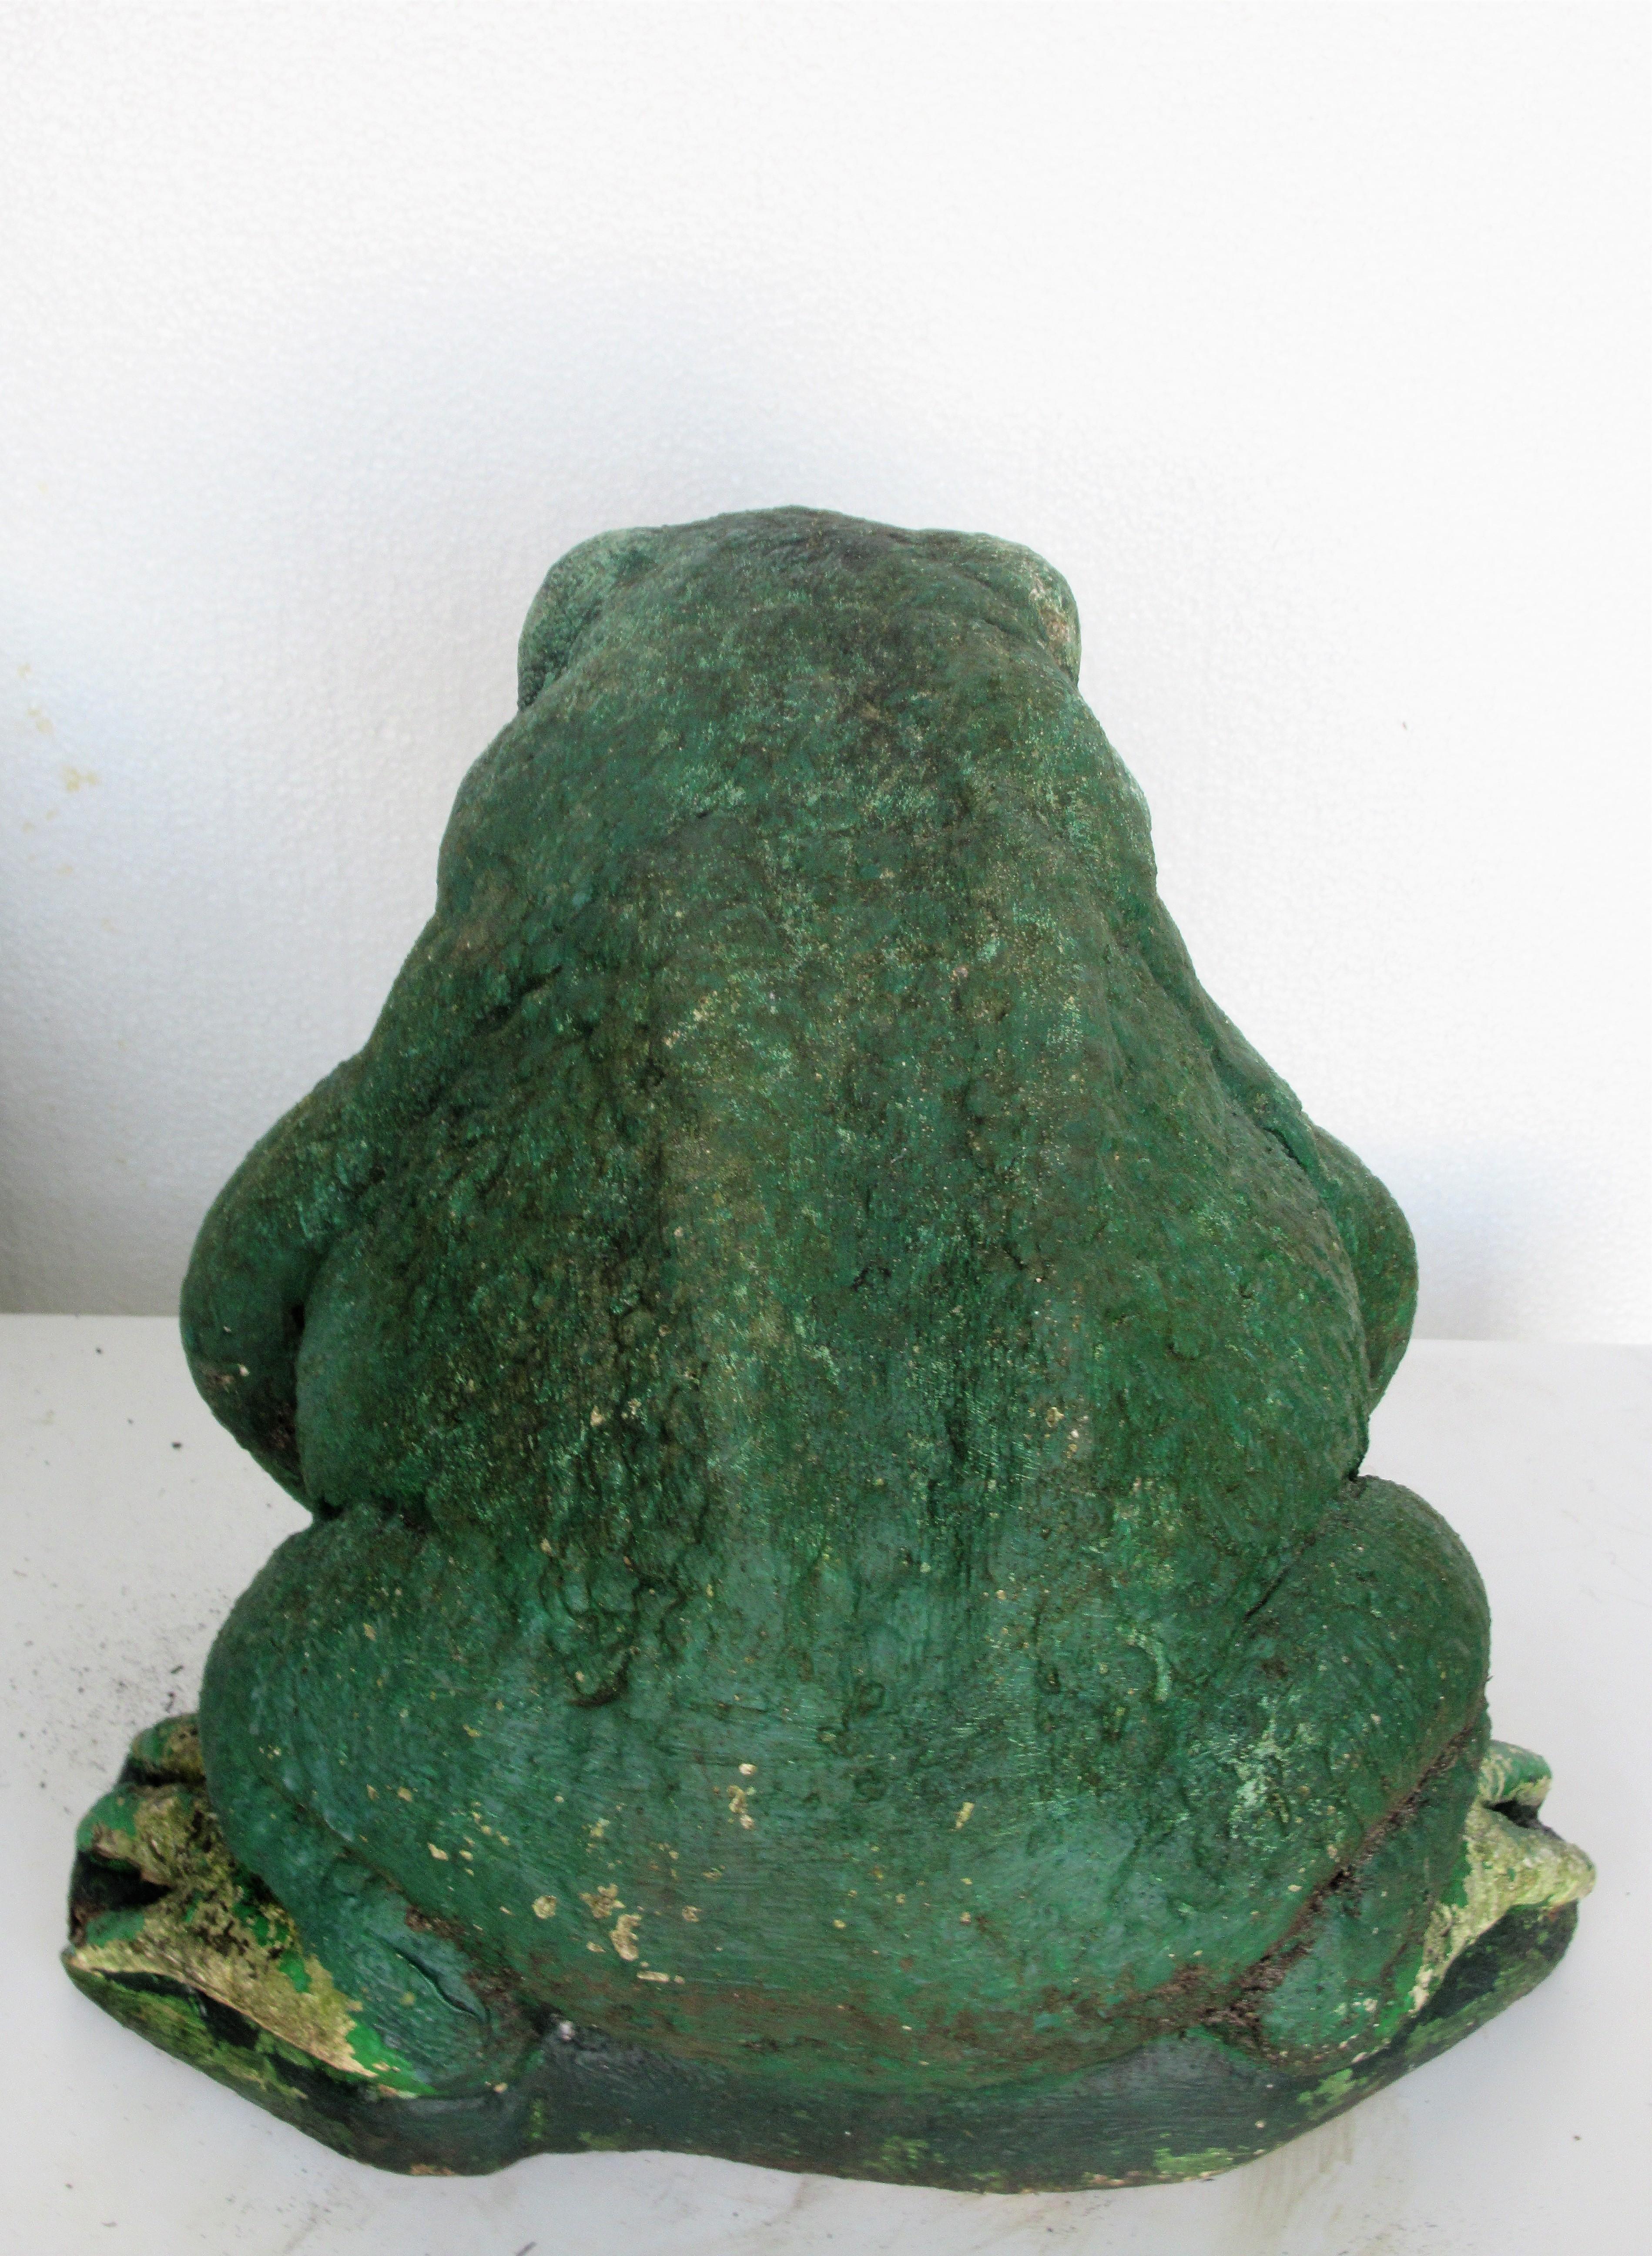  Old Painted Stone Garden Toads 5